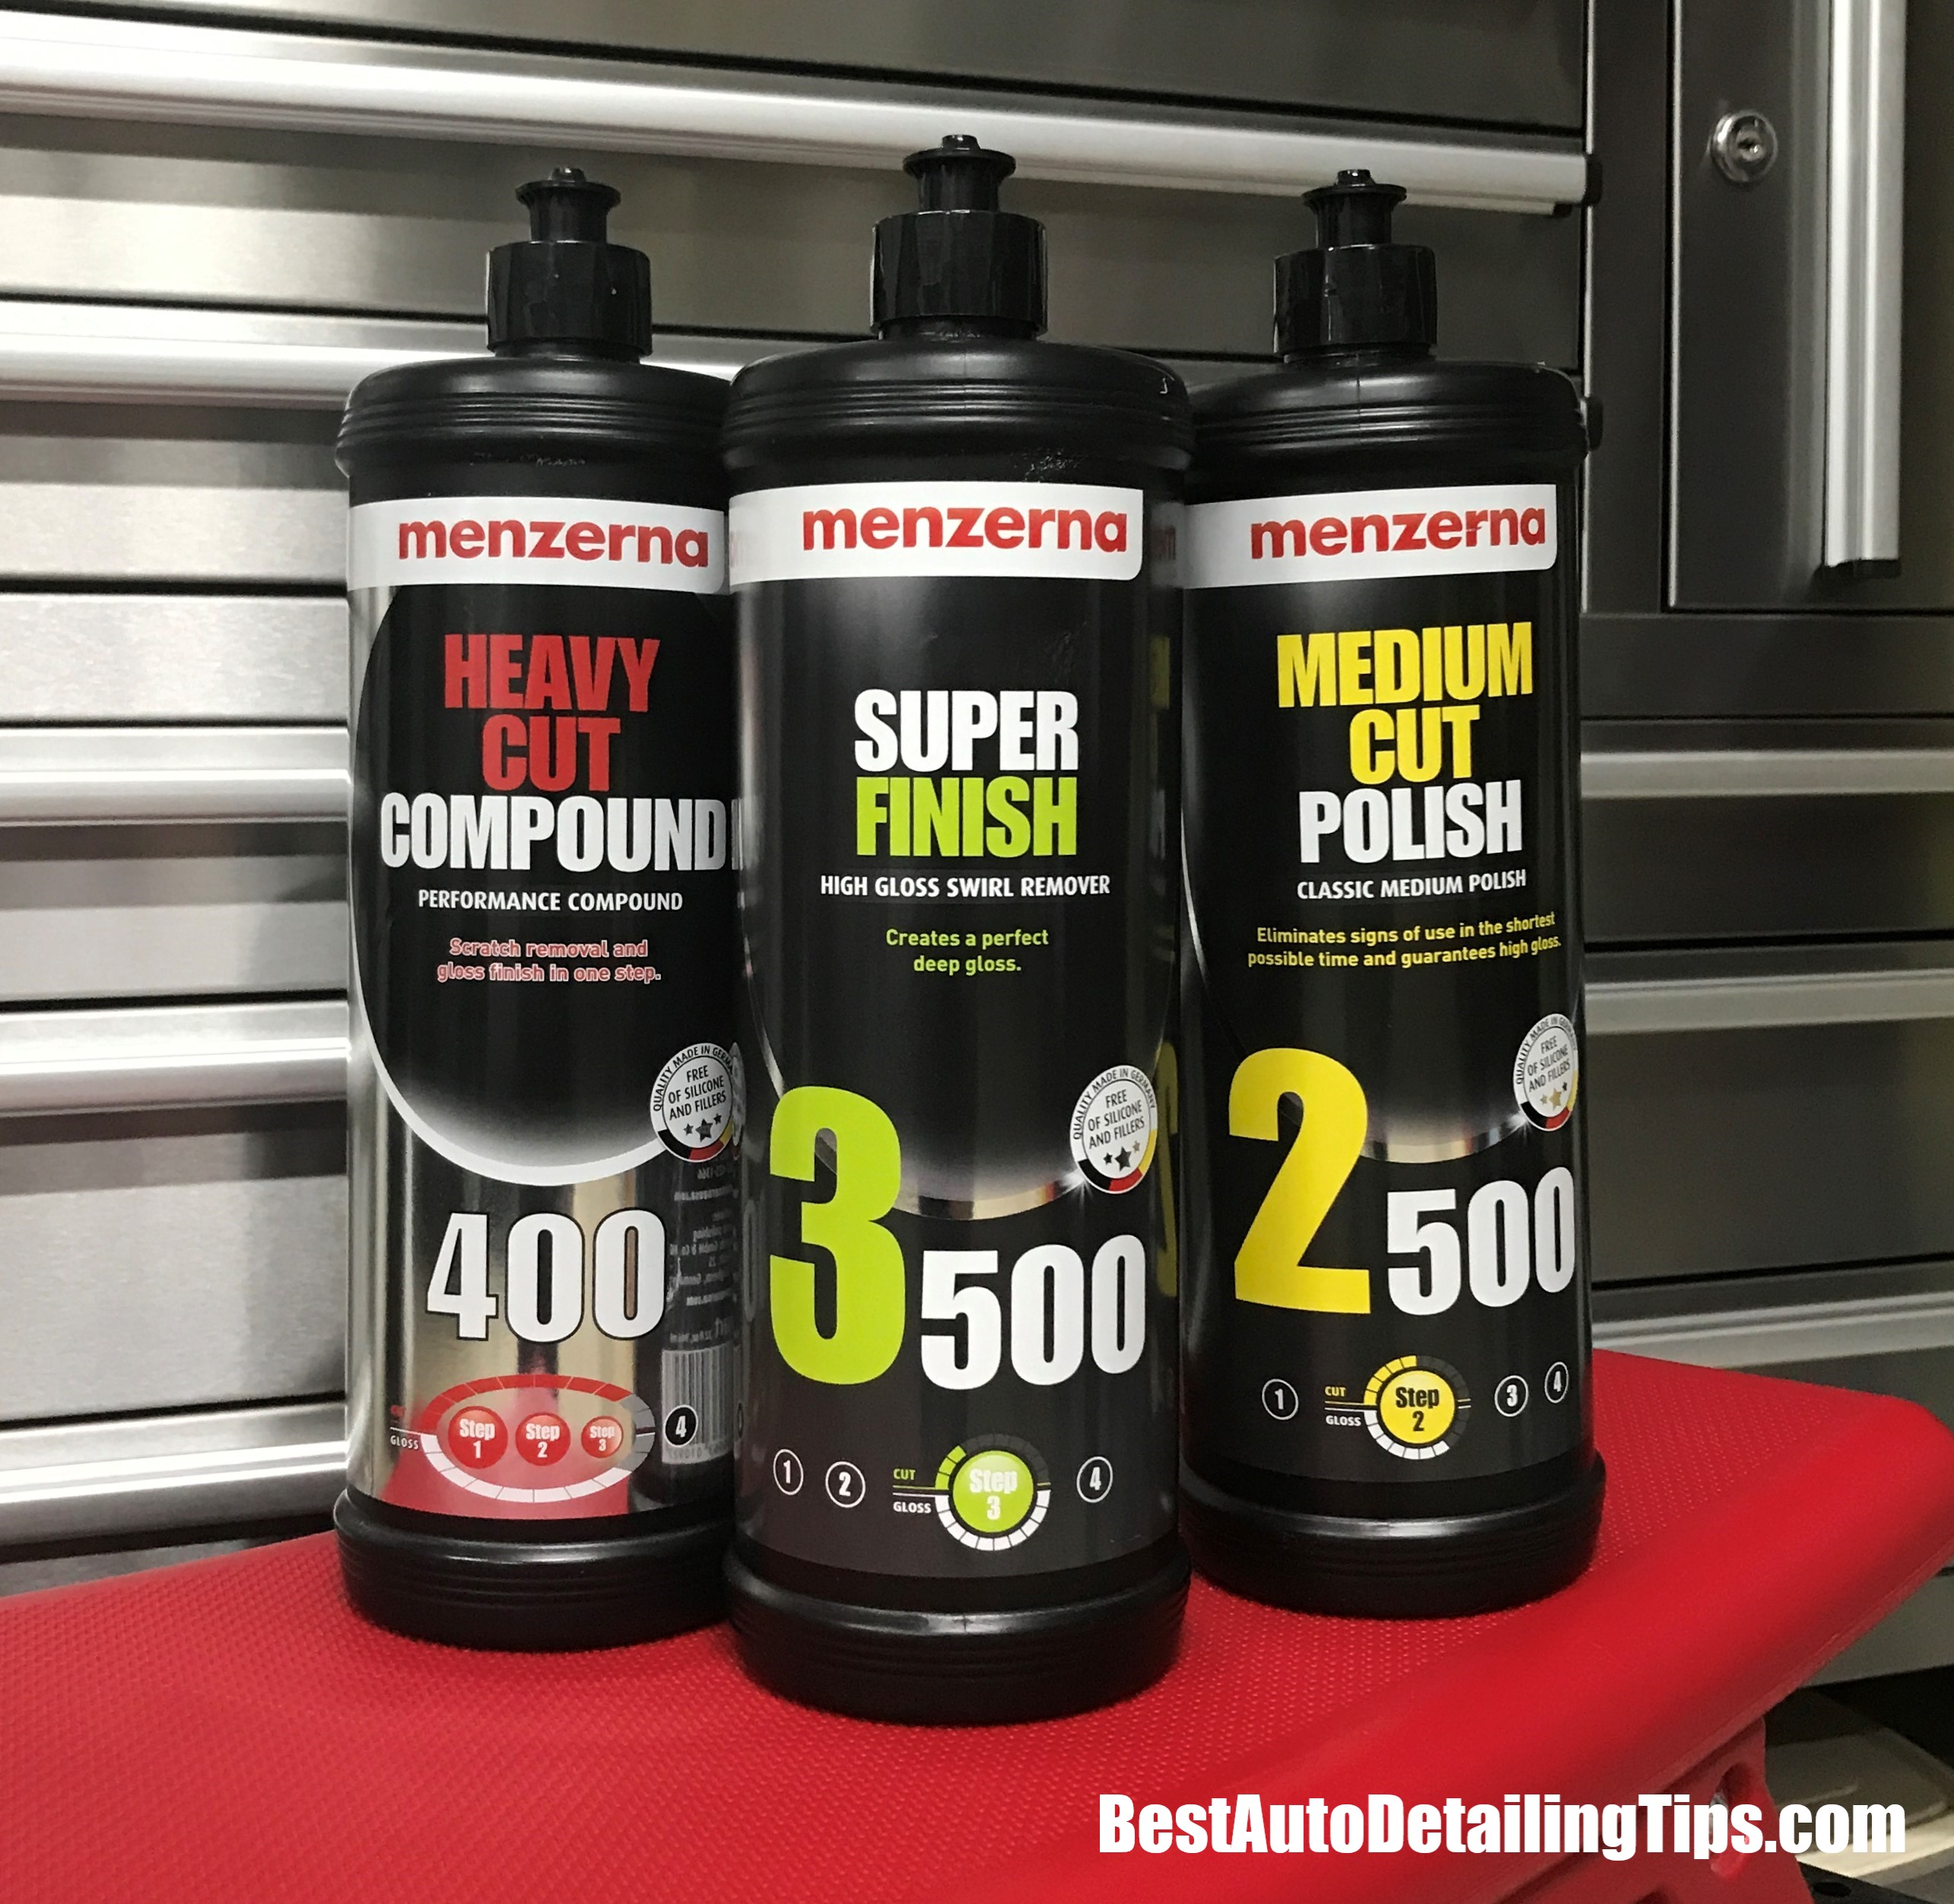 Is polishing compound really killing your car paint? Read and learn